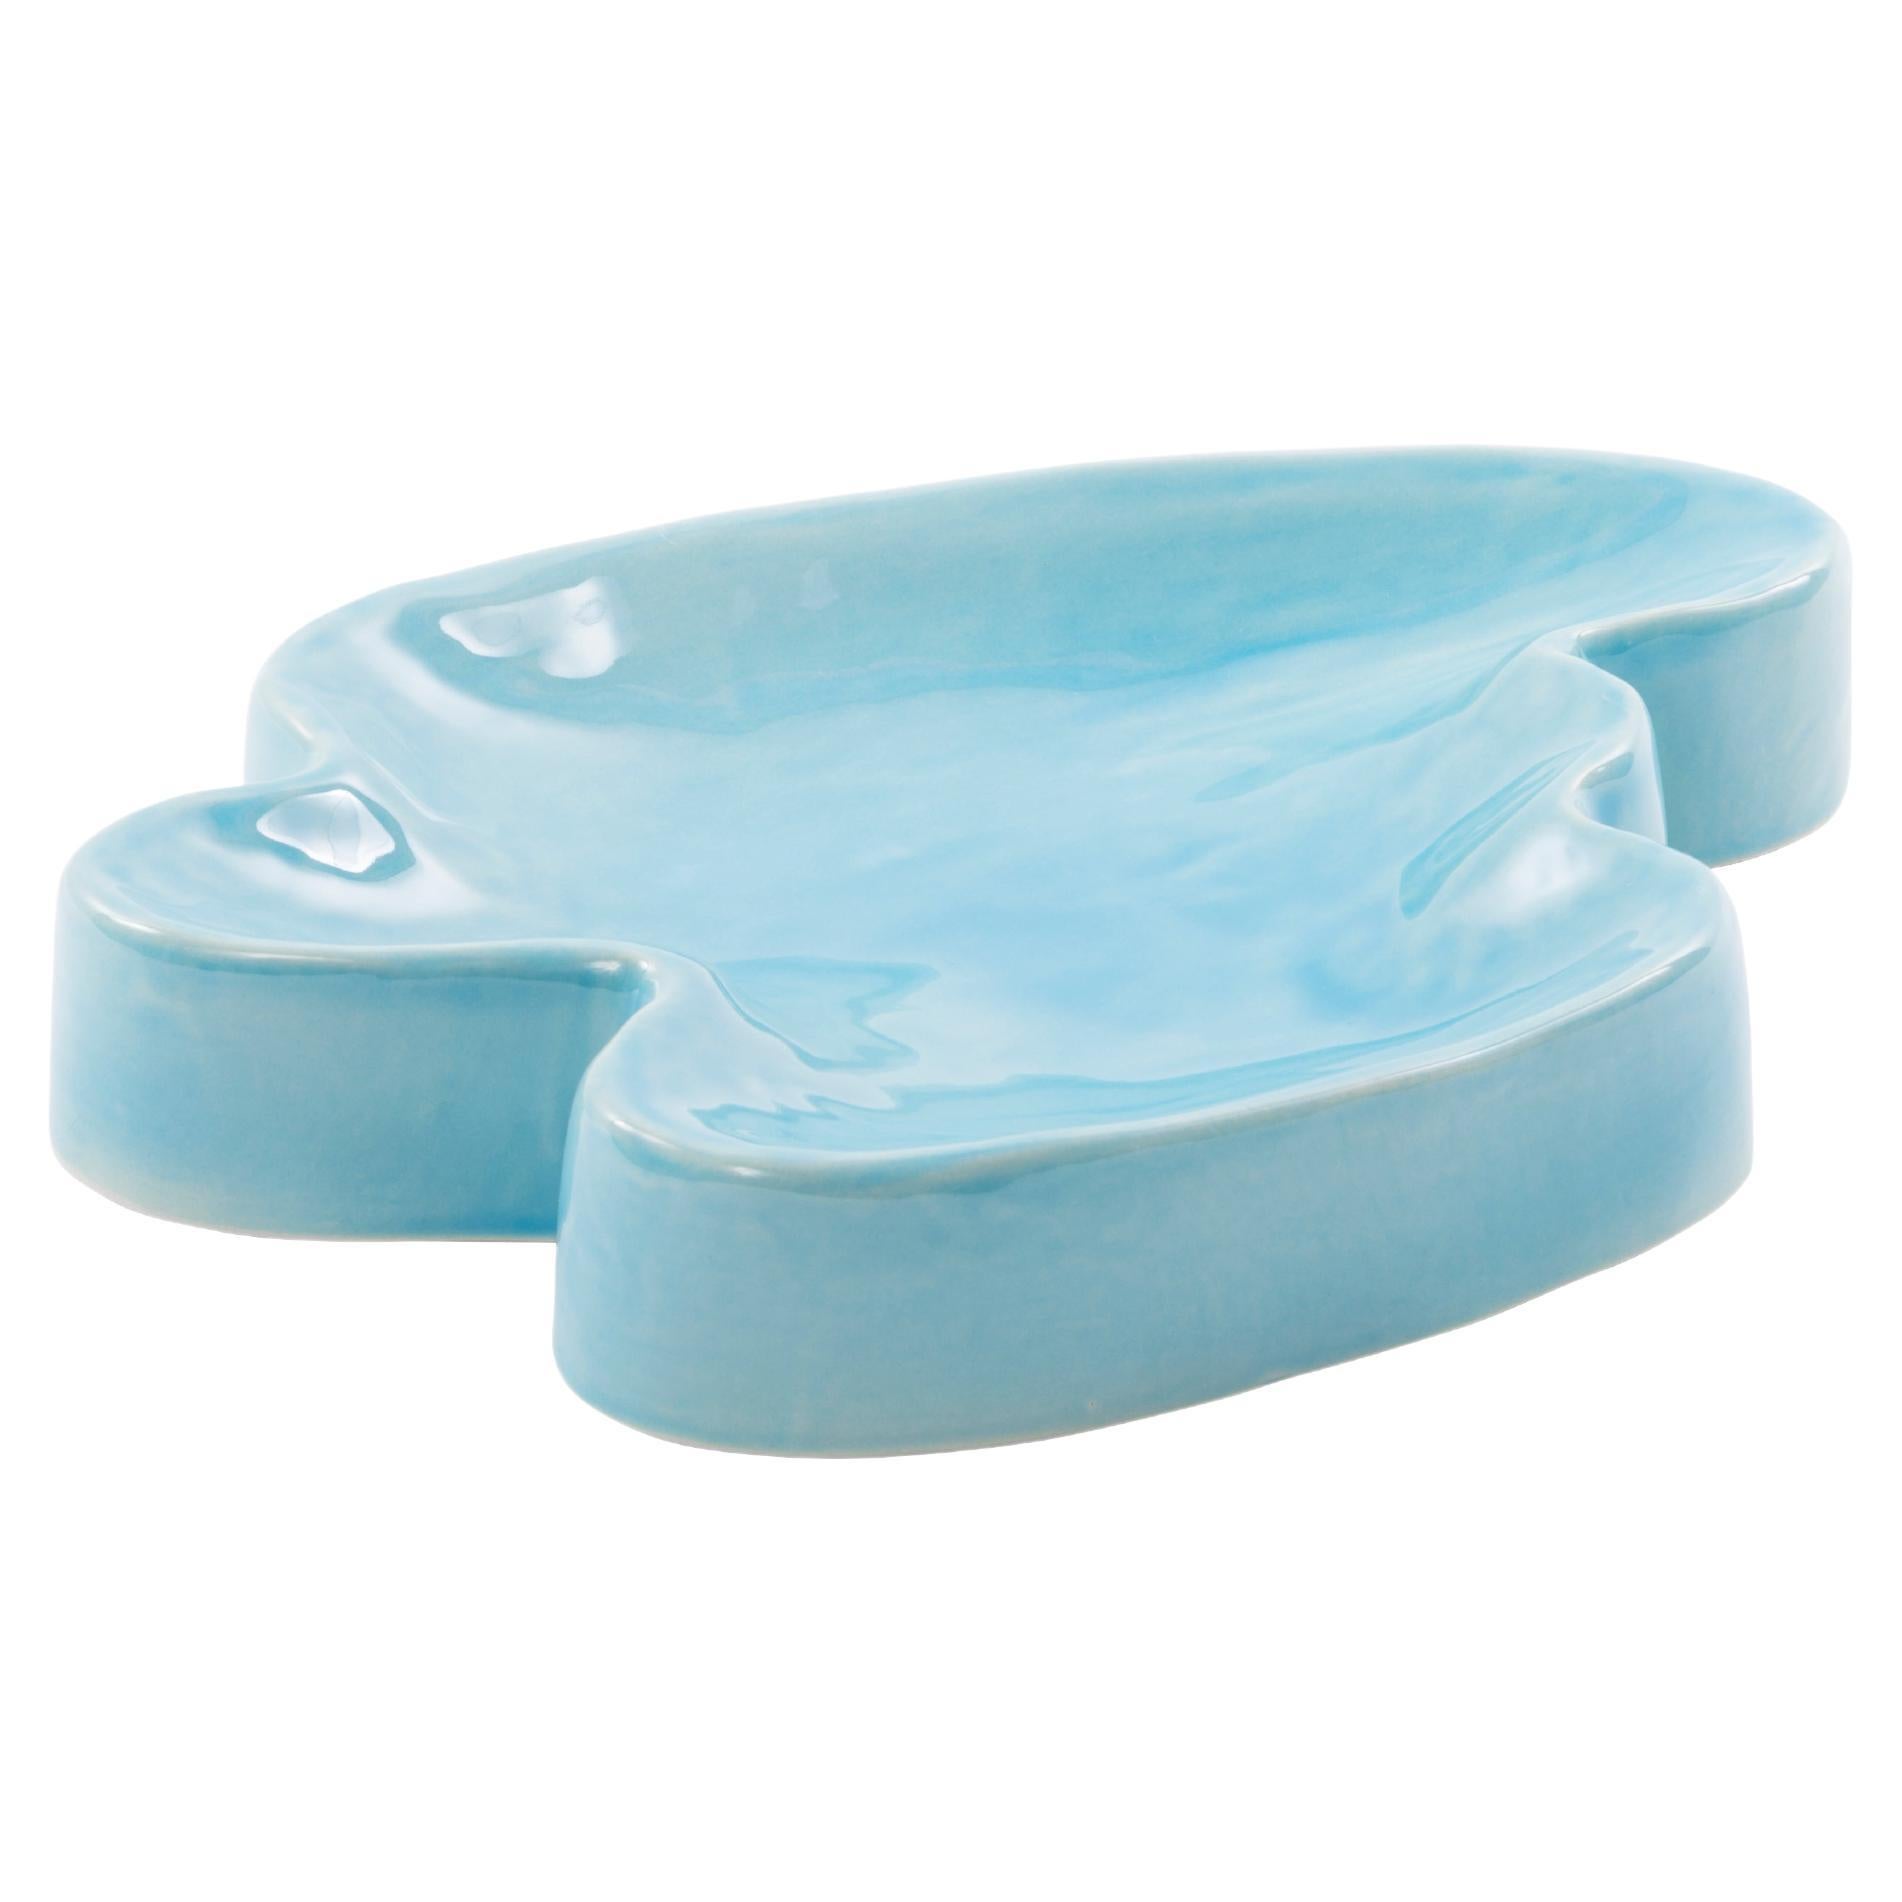 Lake Small Tropical Turquoise Tray by Pulpo